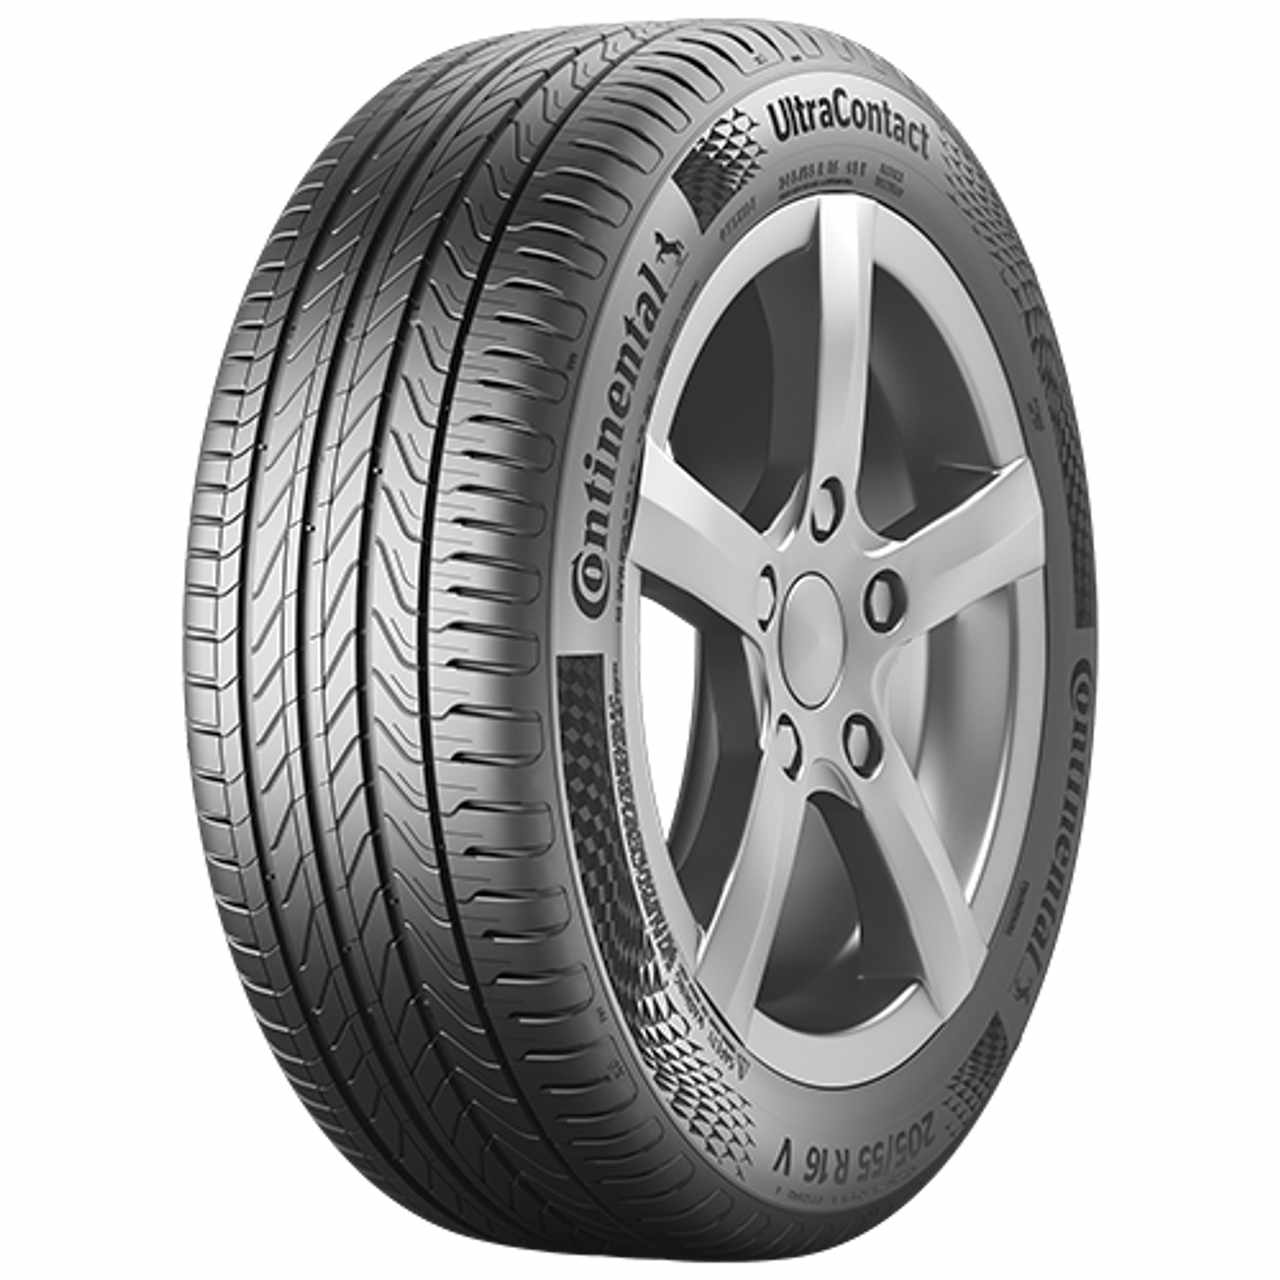 CONTINENTAL ULTRACONTACT (EVc) 195/50R15 82V BSW